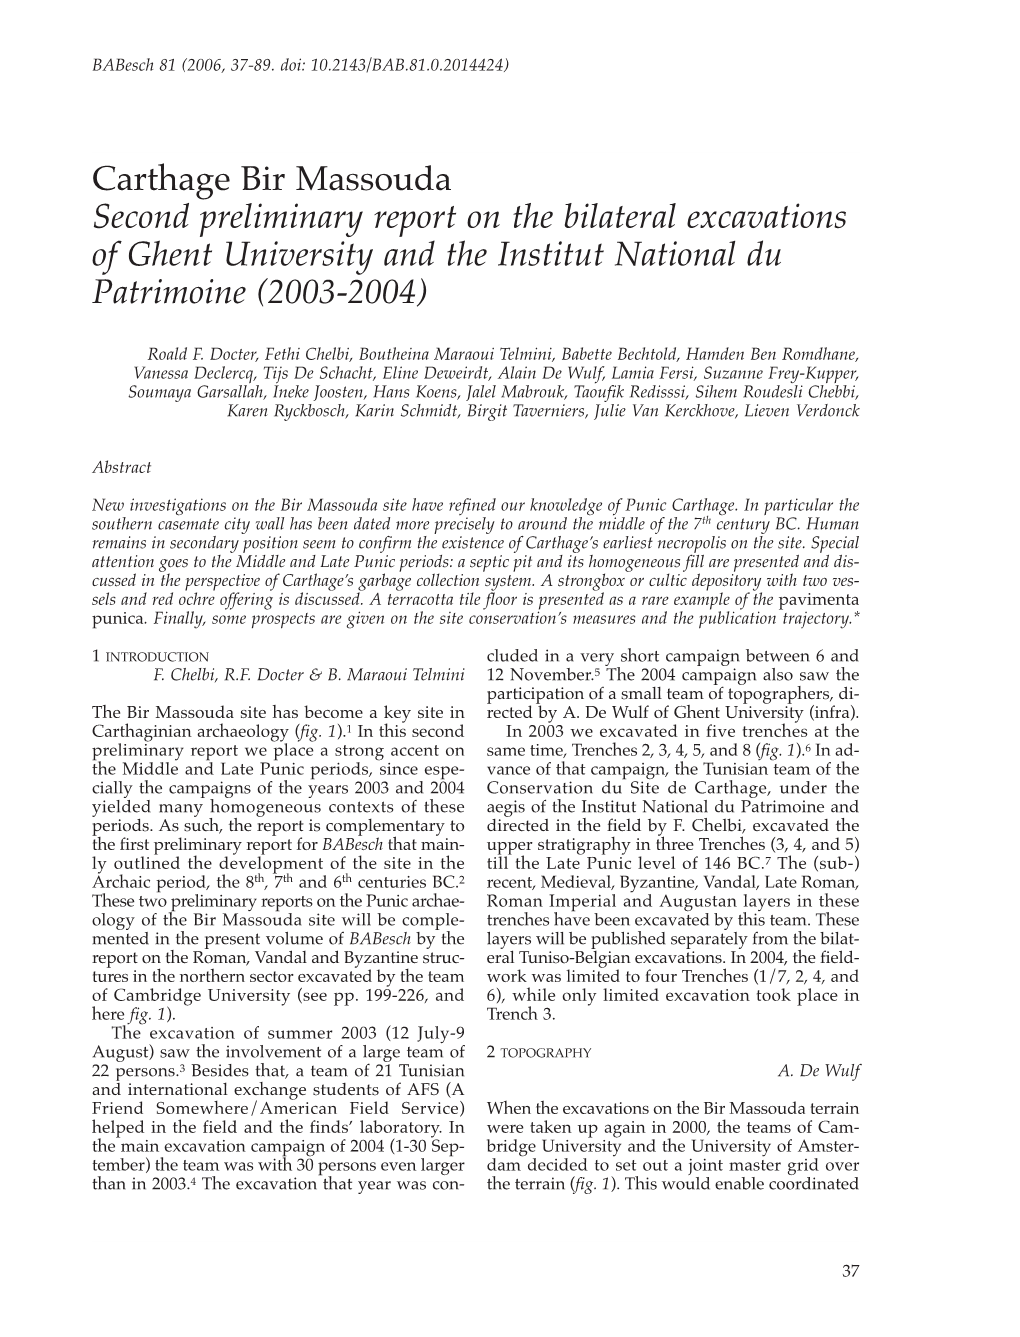 Carthage Bir Massouda Second Preliminary Report on the Bilateral Excavations of Ghent University and the Institut National Du Patrimoine (2003-2004)